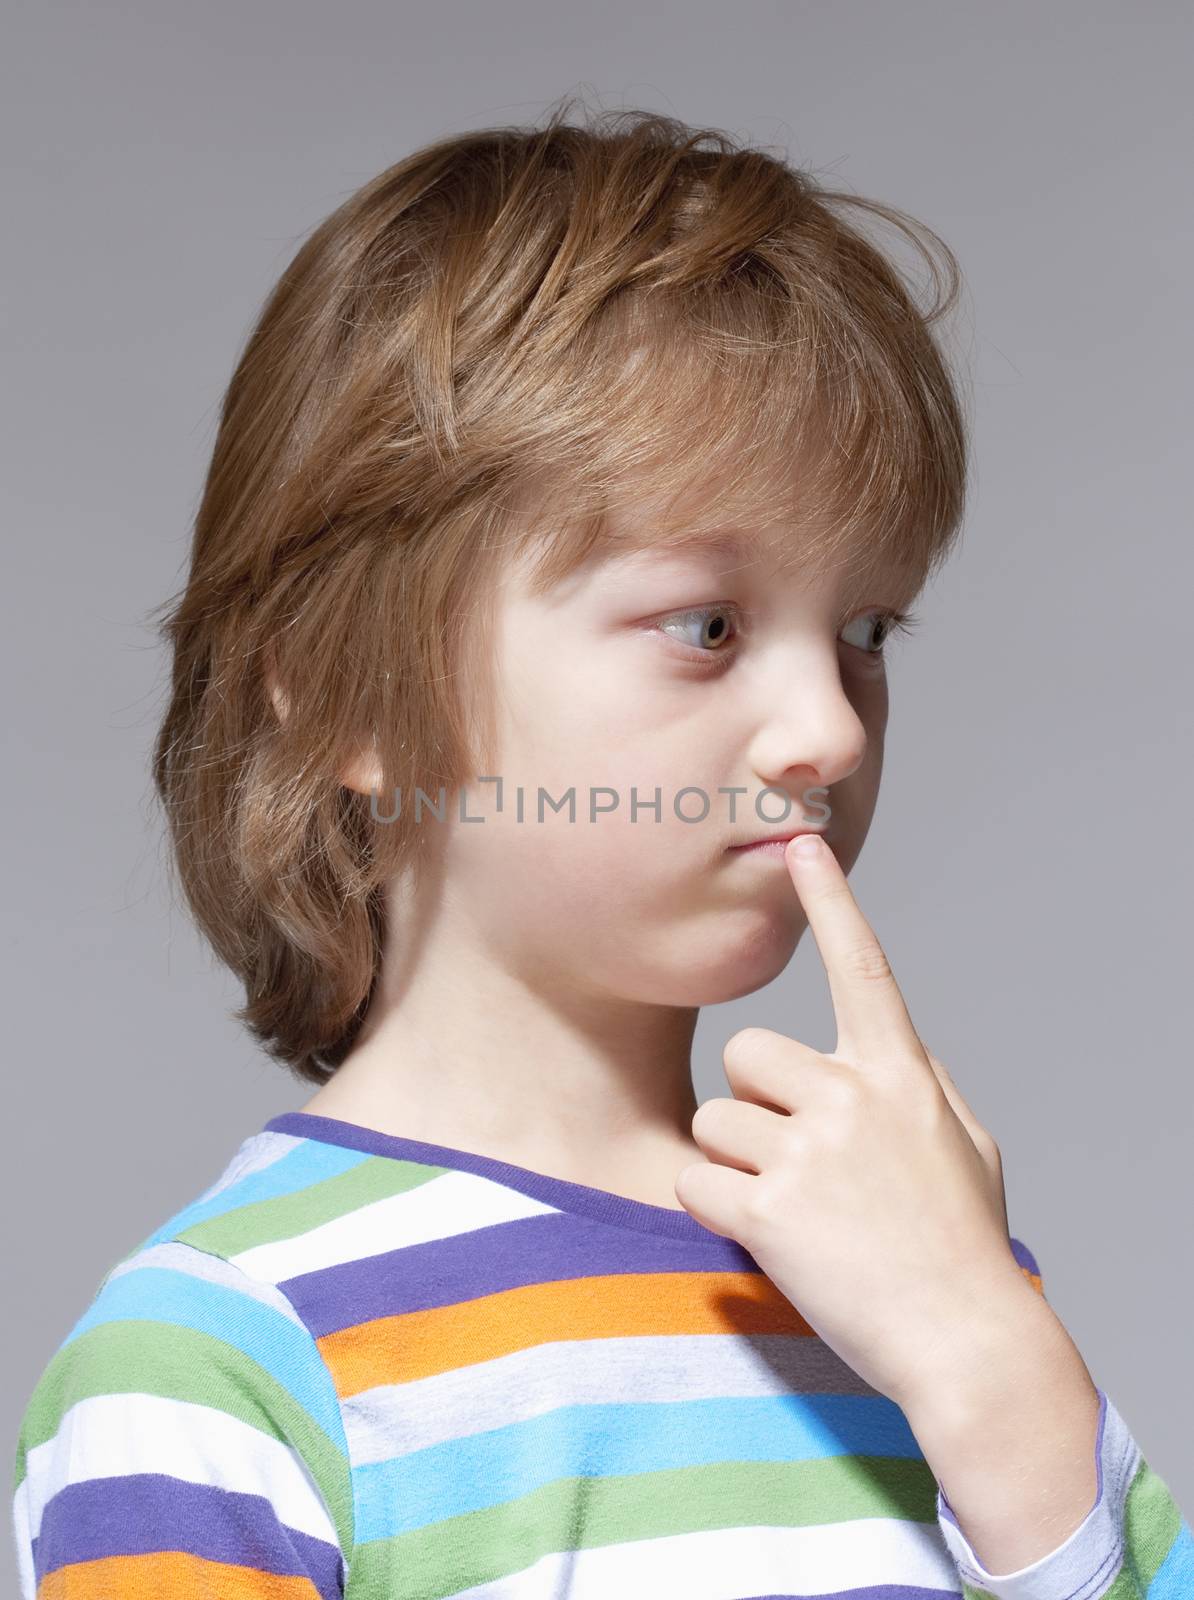 Portrait of a Boy with Blond Hair Thinking, Finger in his Mouth